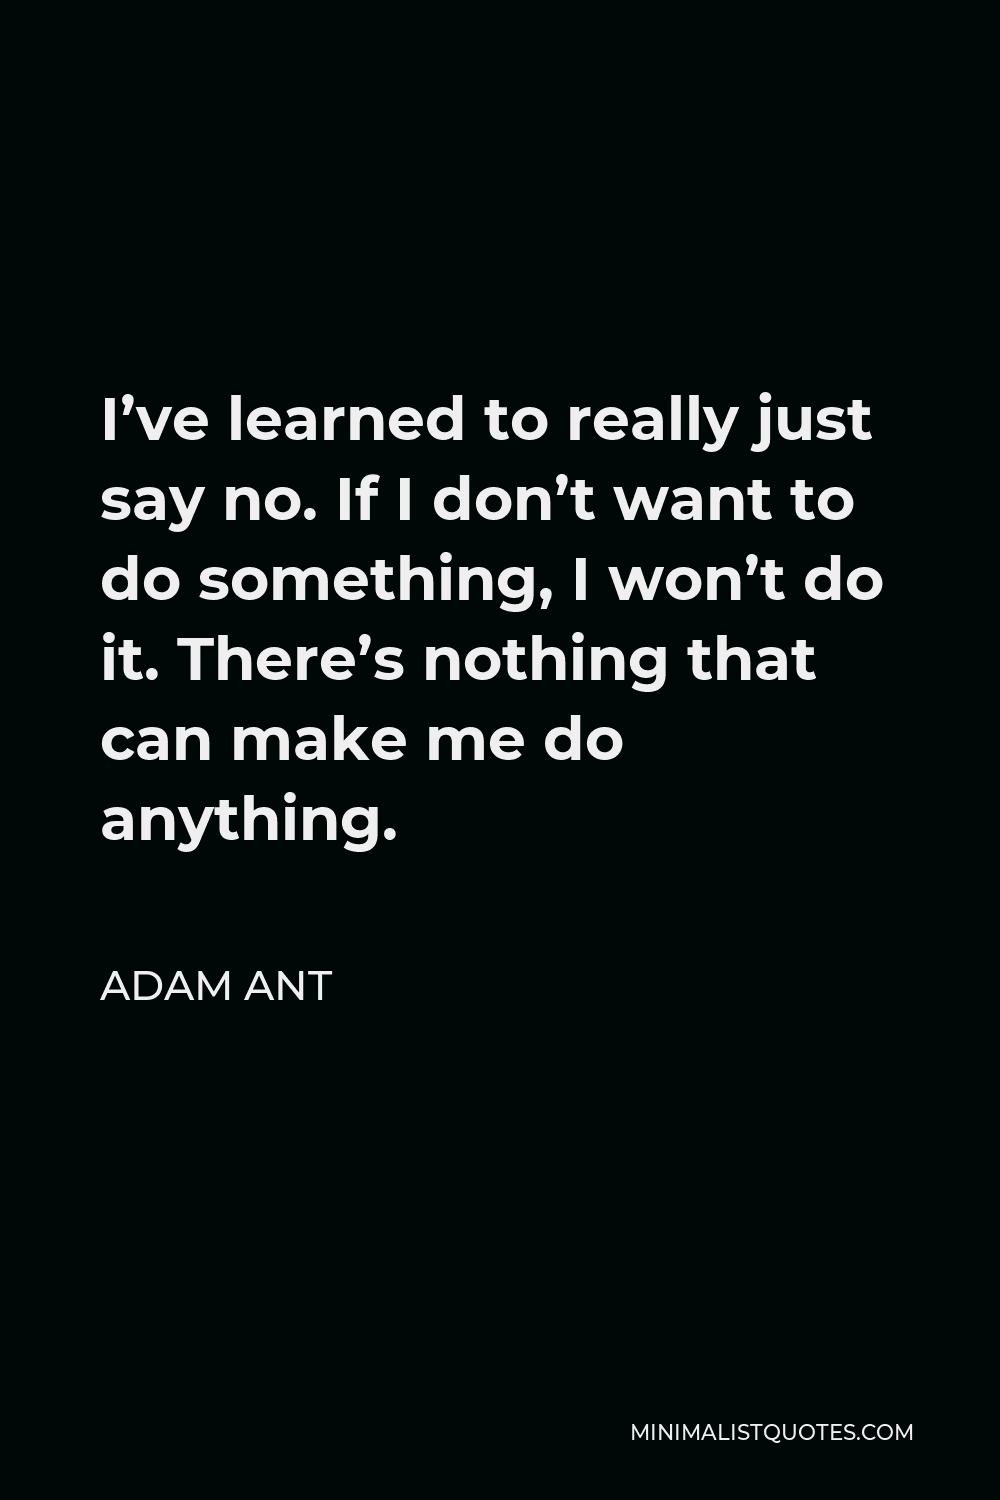 Adam Ant Quote - I’ve learned to really just say no. If I don’t want to do something, I won’t do it. There’s nothing that can make me do anything.